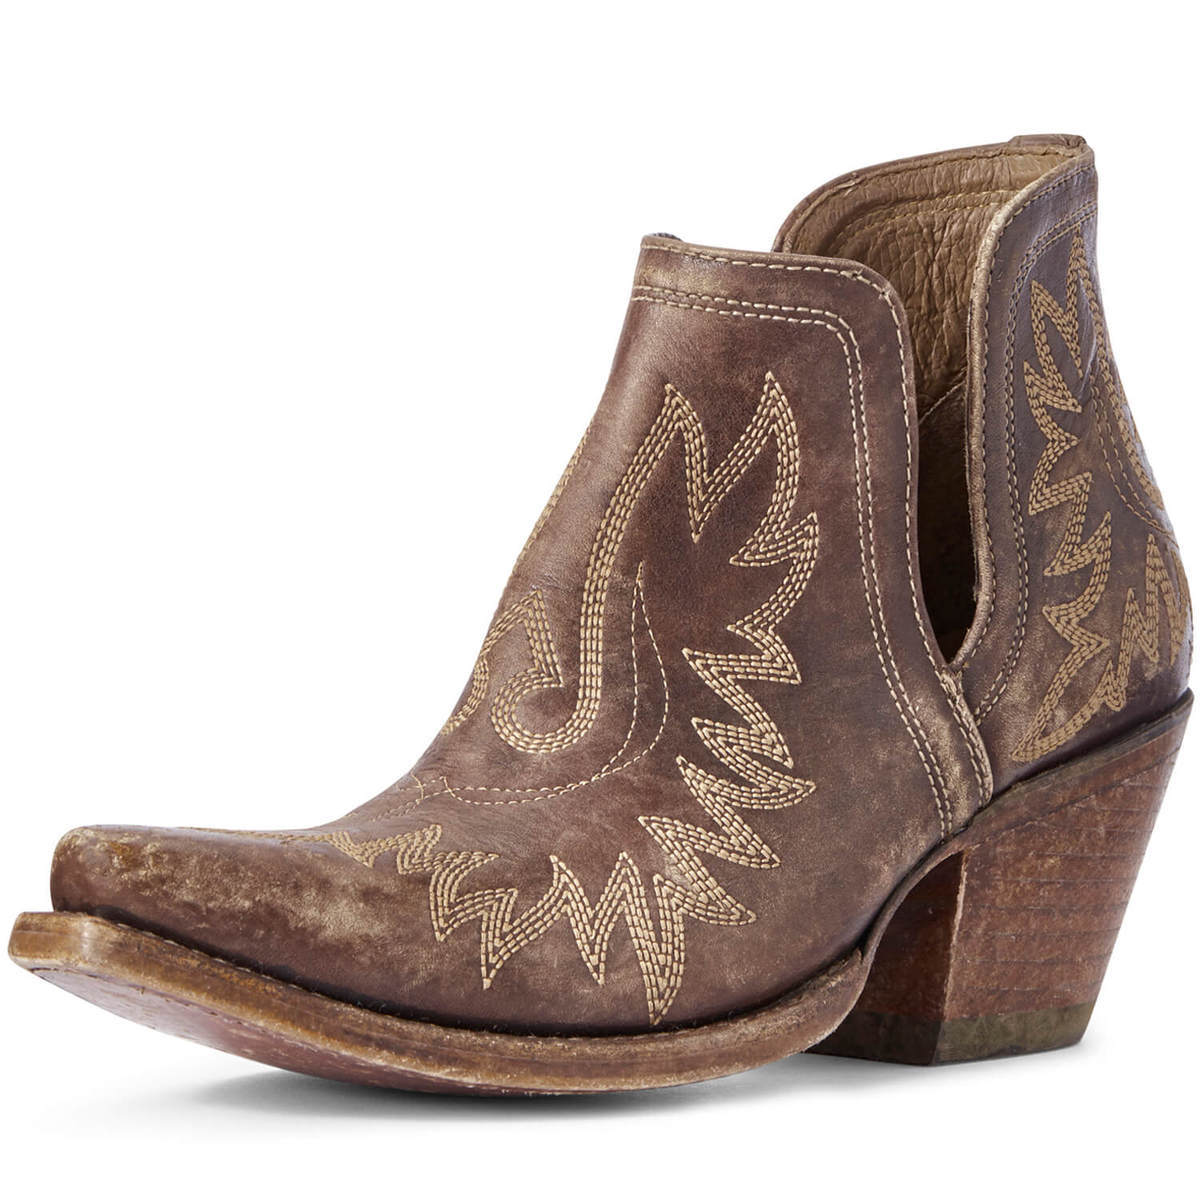 Ariat Women's Dixon Western Boots - Distressed Brown - Size 9.5 ...